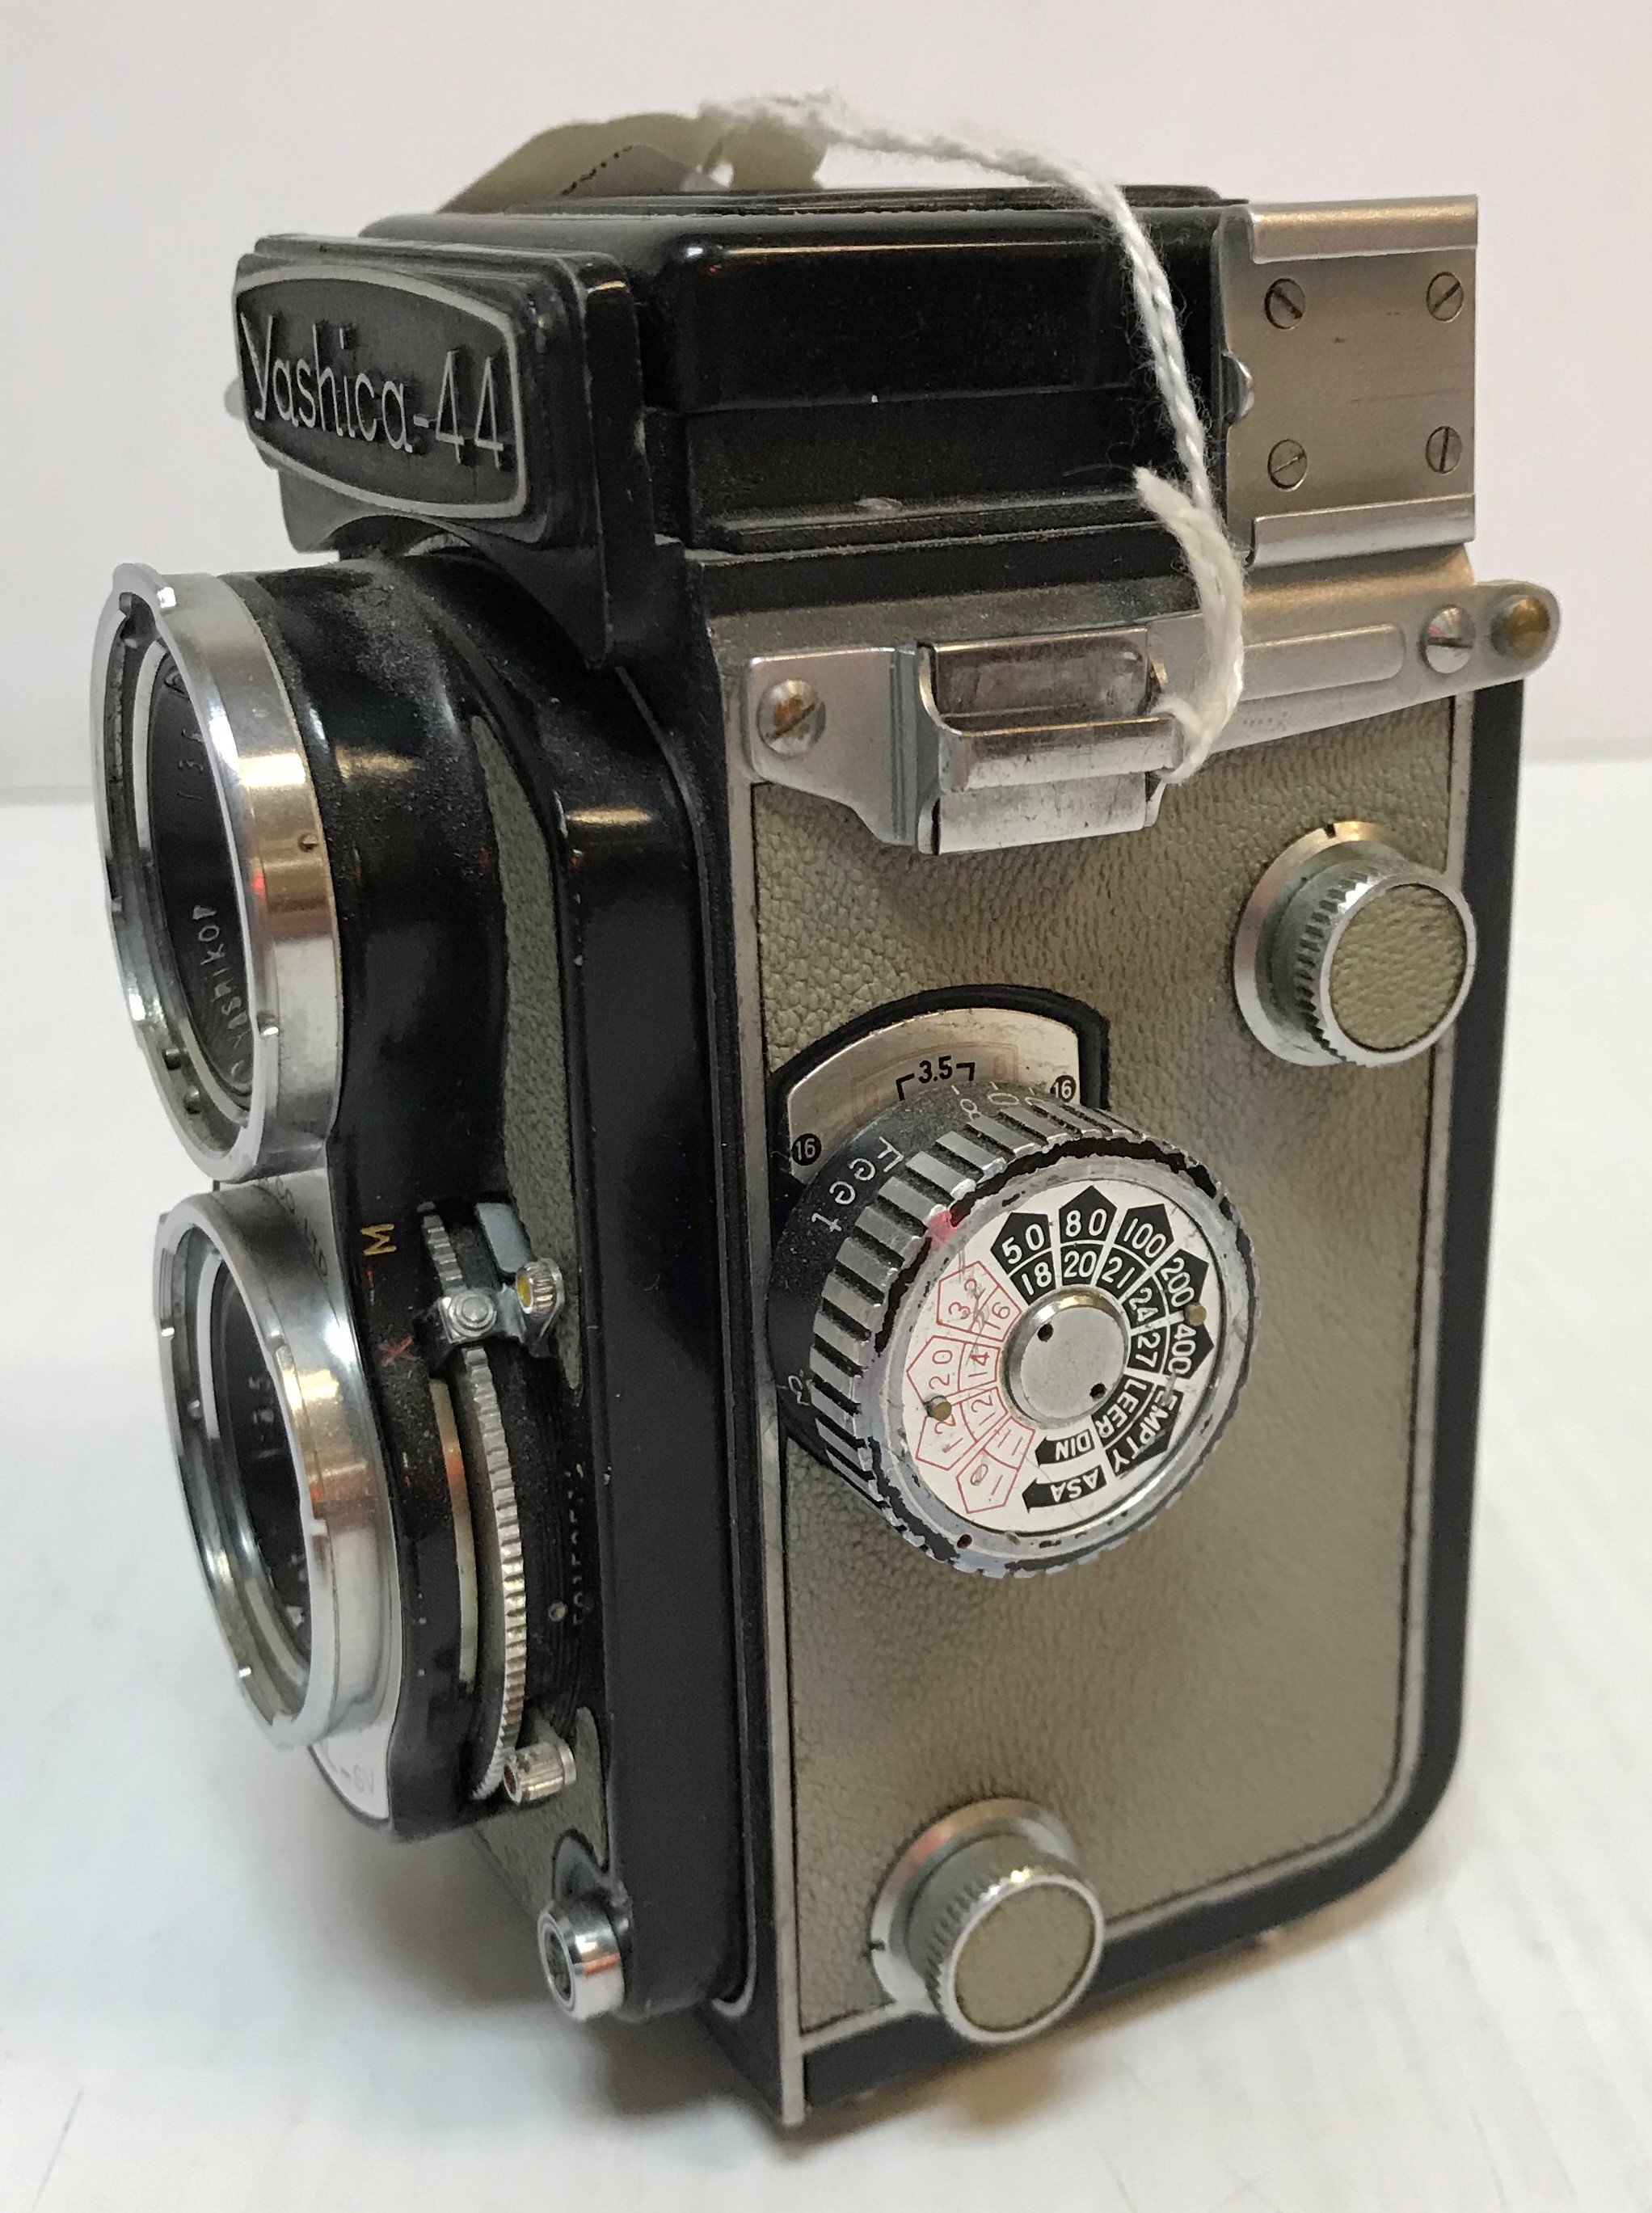 A Yashica 44 twin reflex camera, black and pale grey colourway (No. - Image 3 of 5